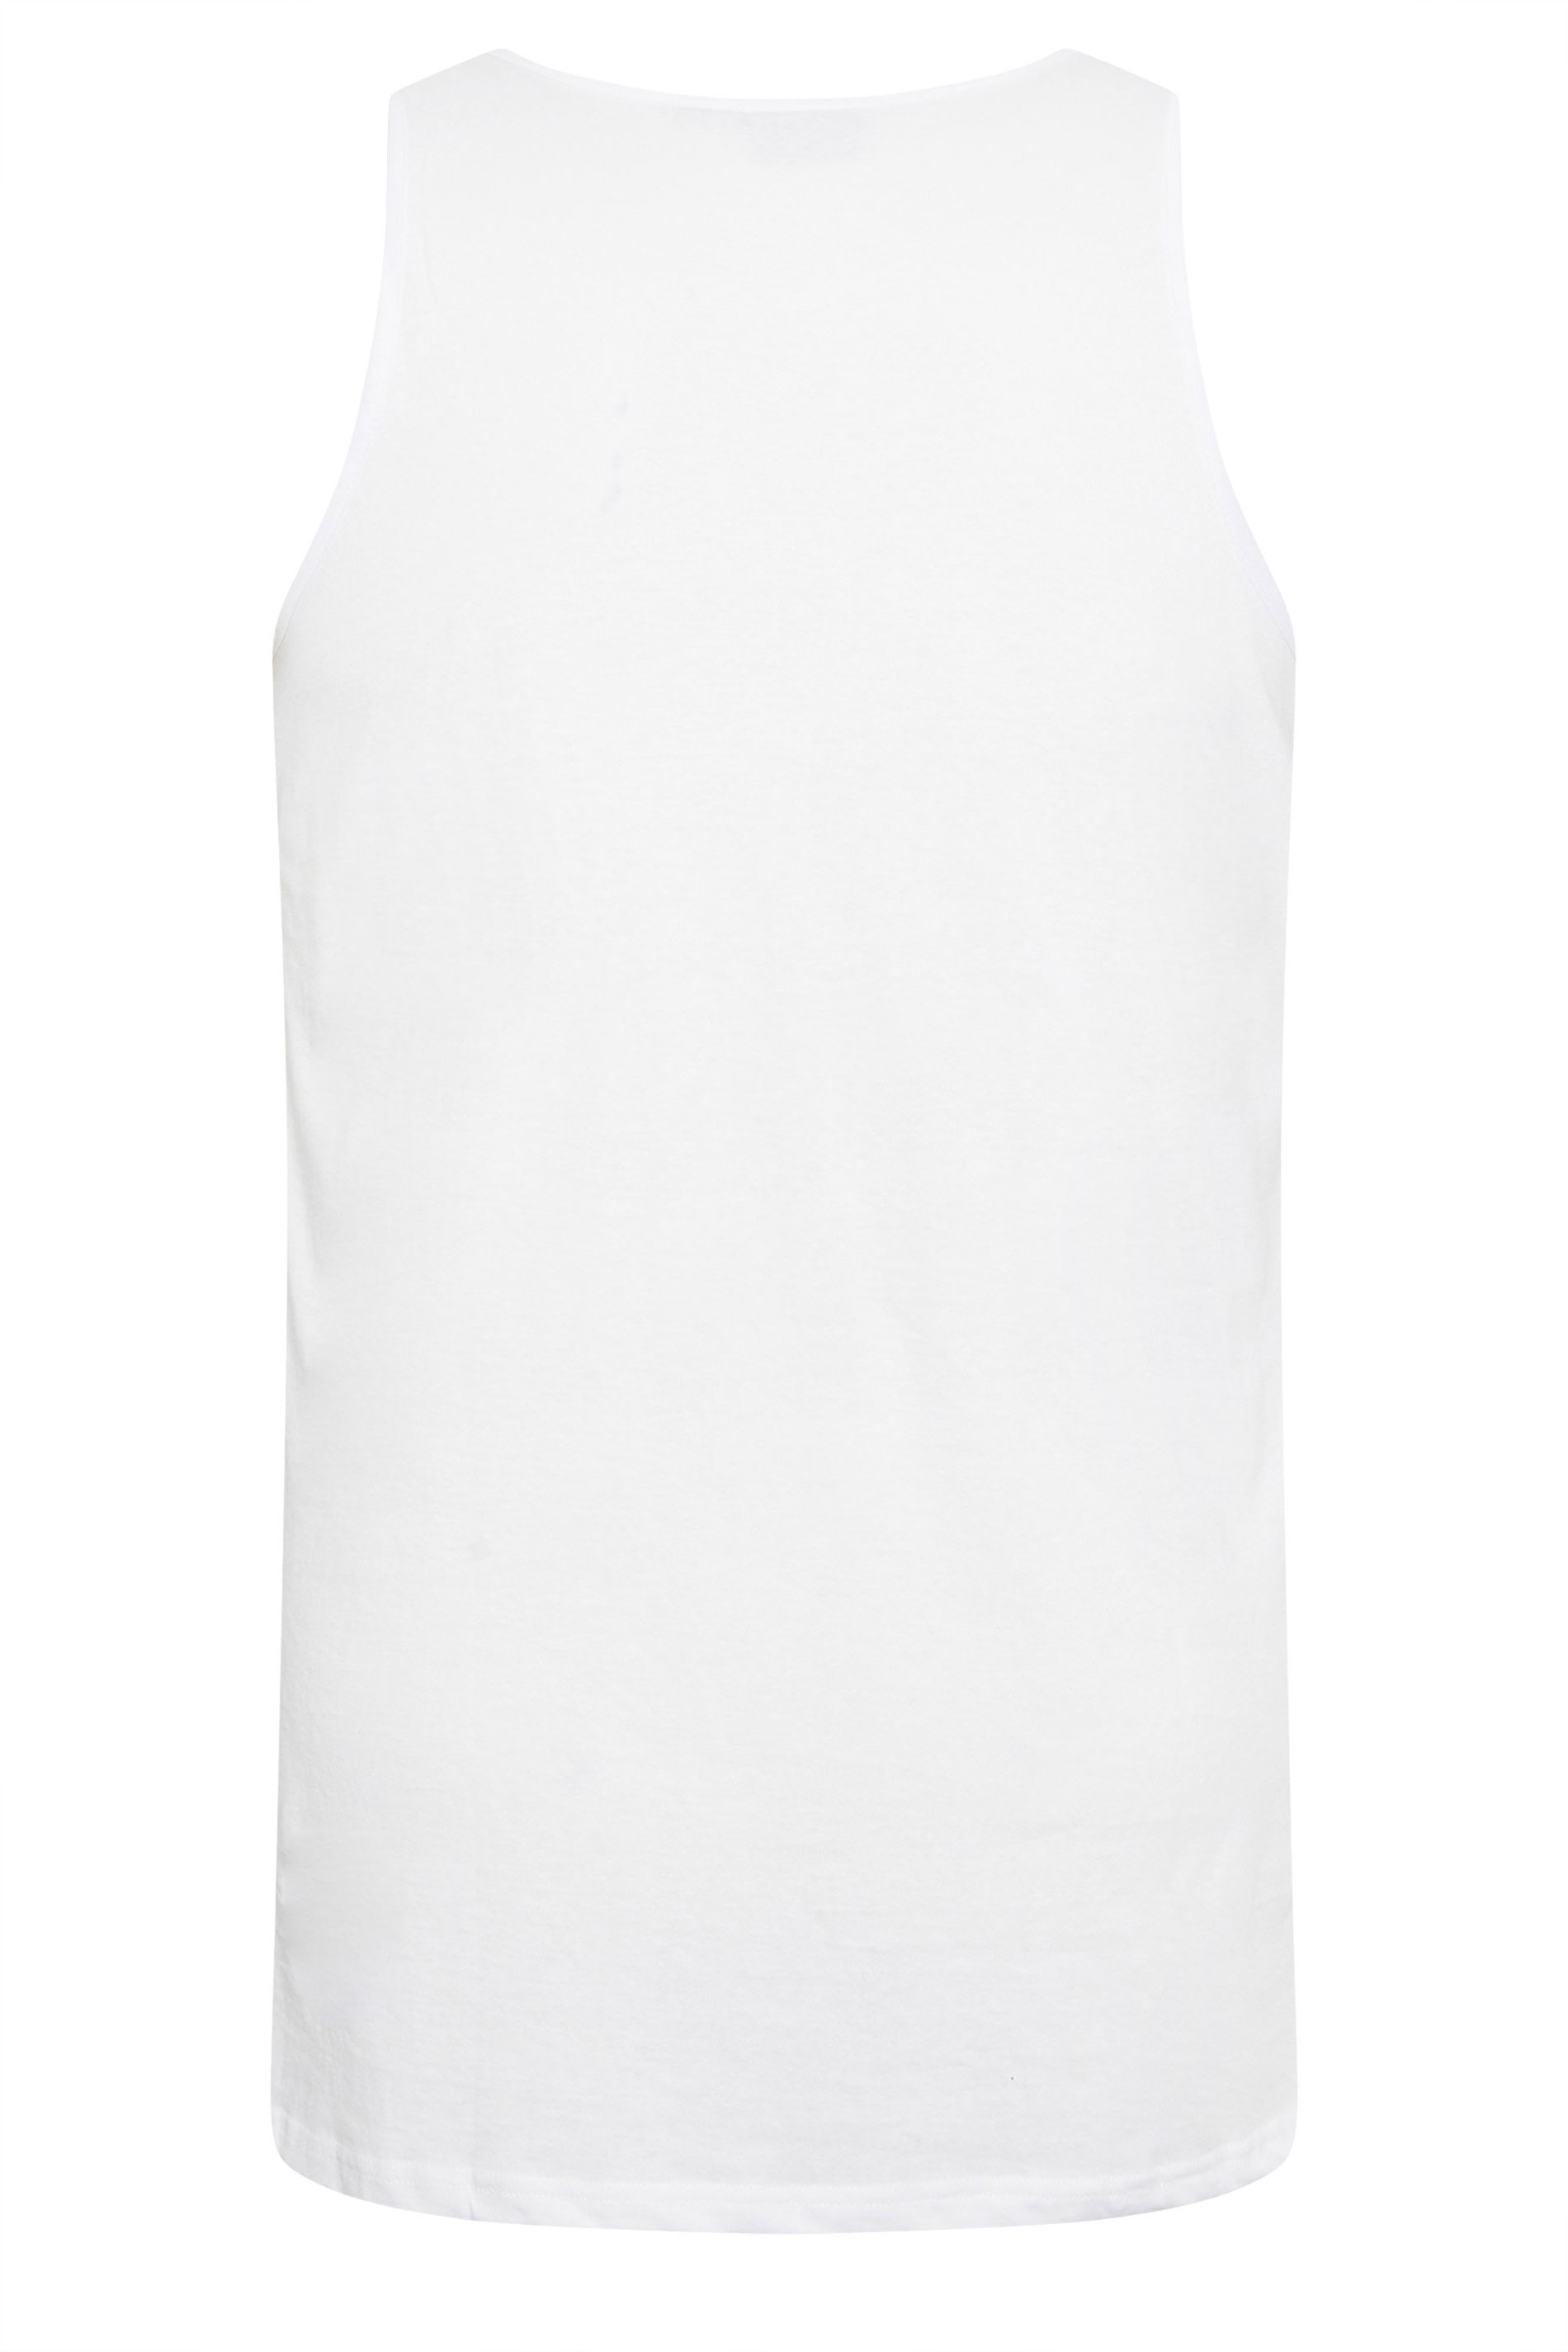 D555 Big & Tall White Muscle Vest | BadRhino 3